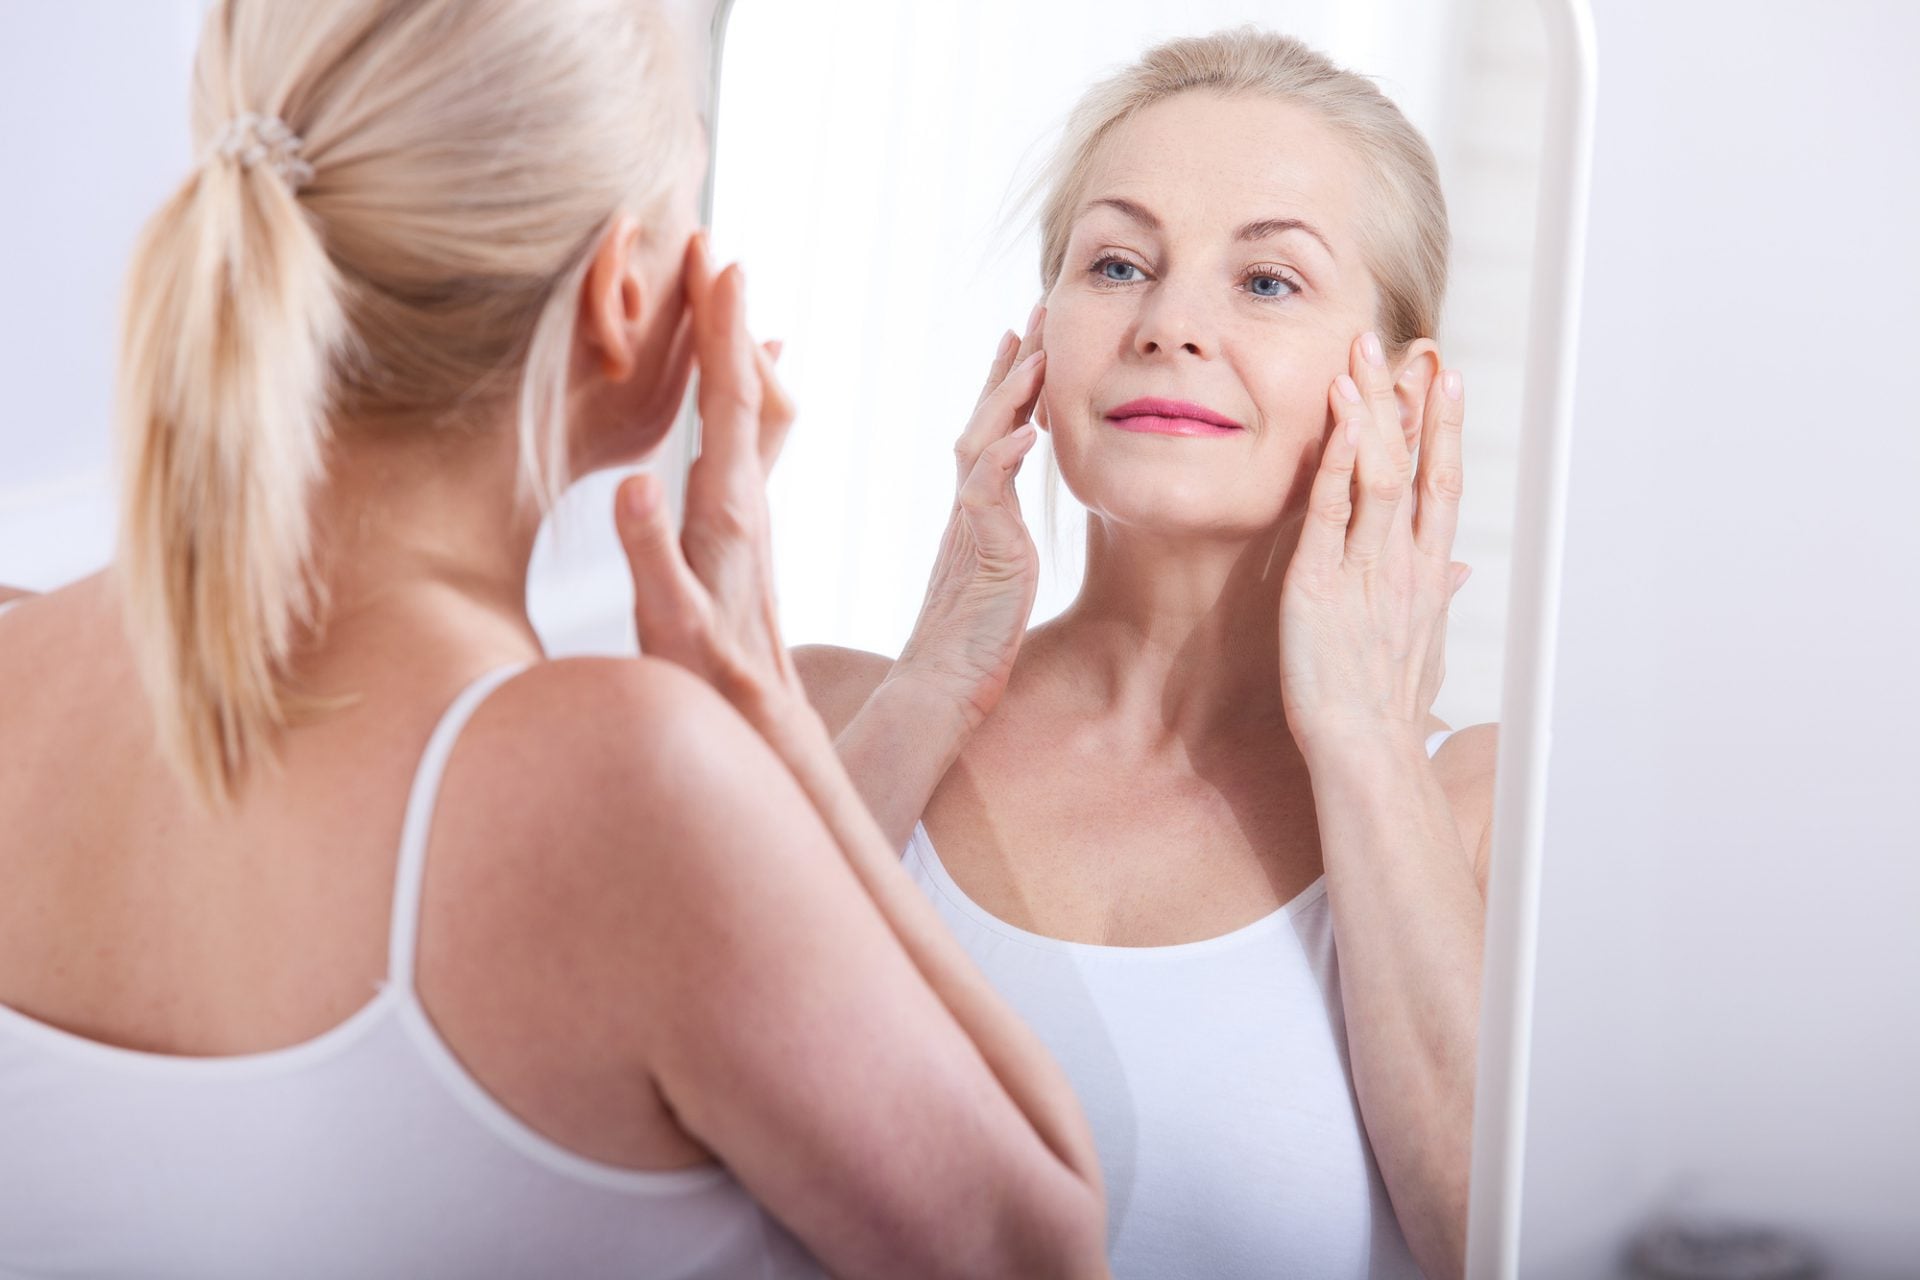 Fine Line and Wrinkles – What are the Causes, Treatment, and Prevention